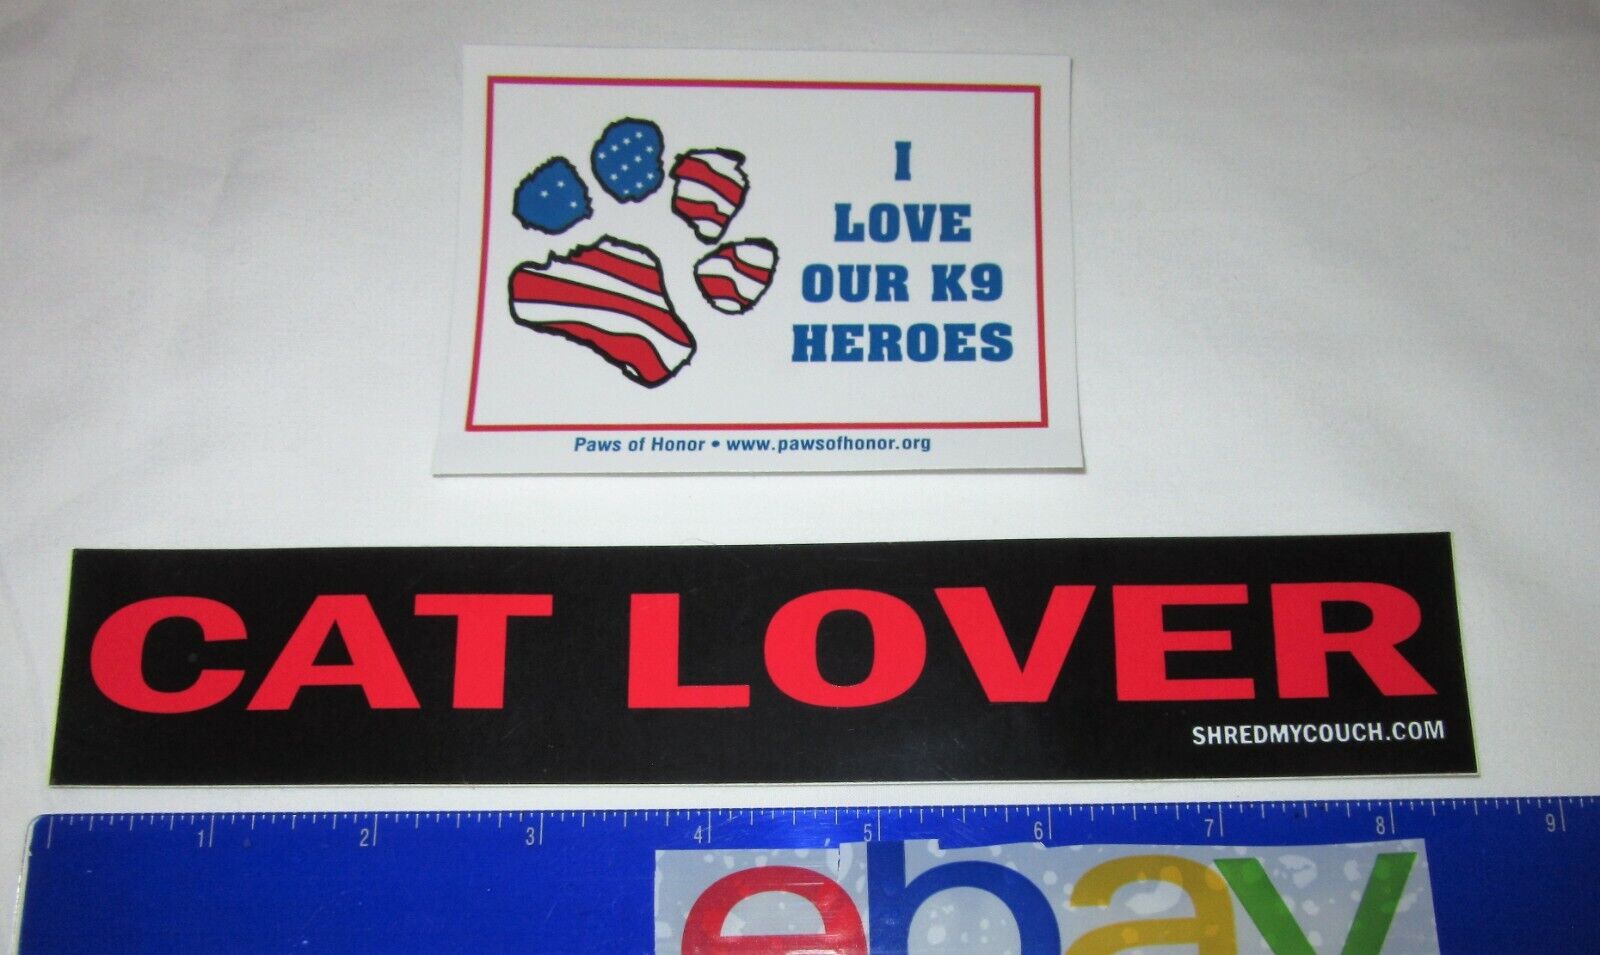 Cat Lover & K9 Heroes sticker pair new unused FREE SHIPPING in the US Shredmycouch - фотография #3